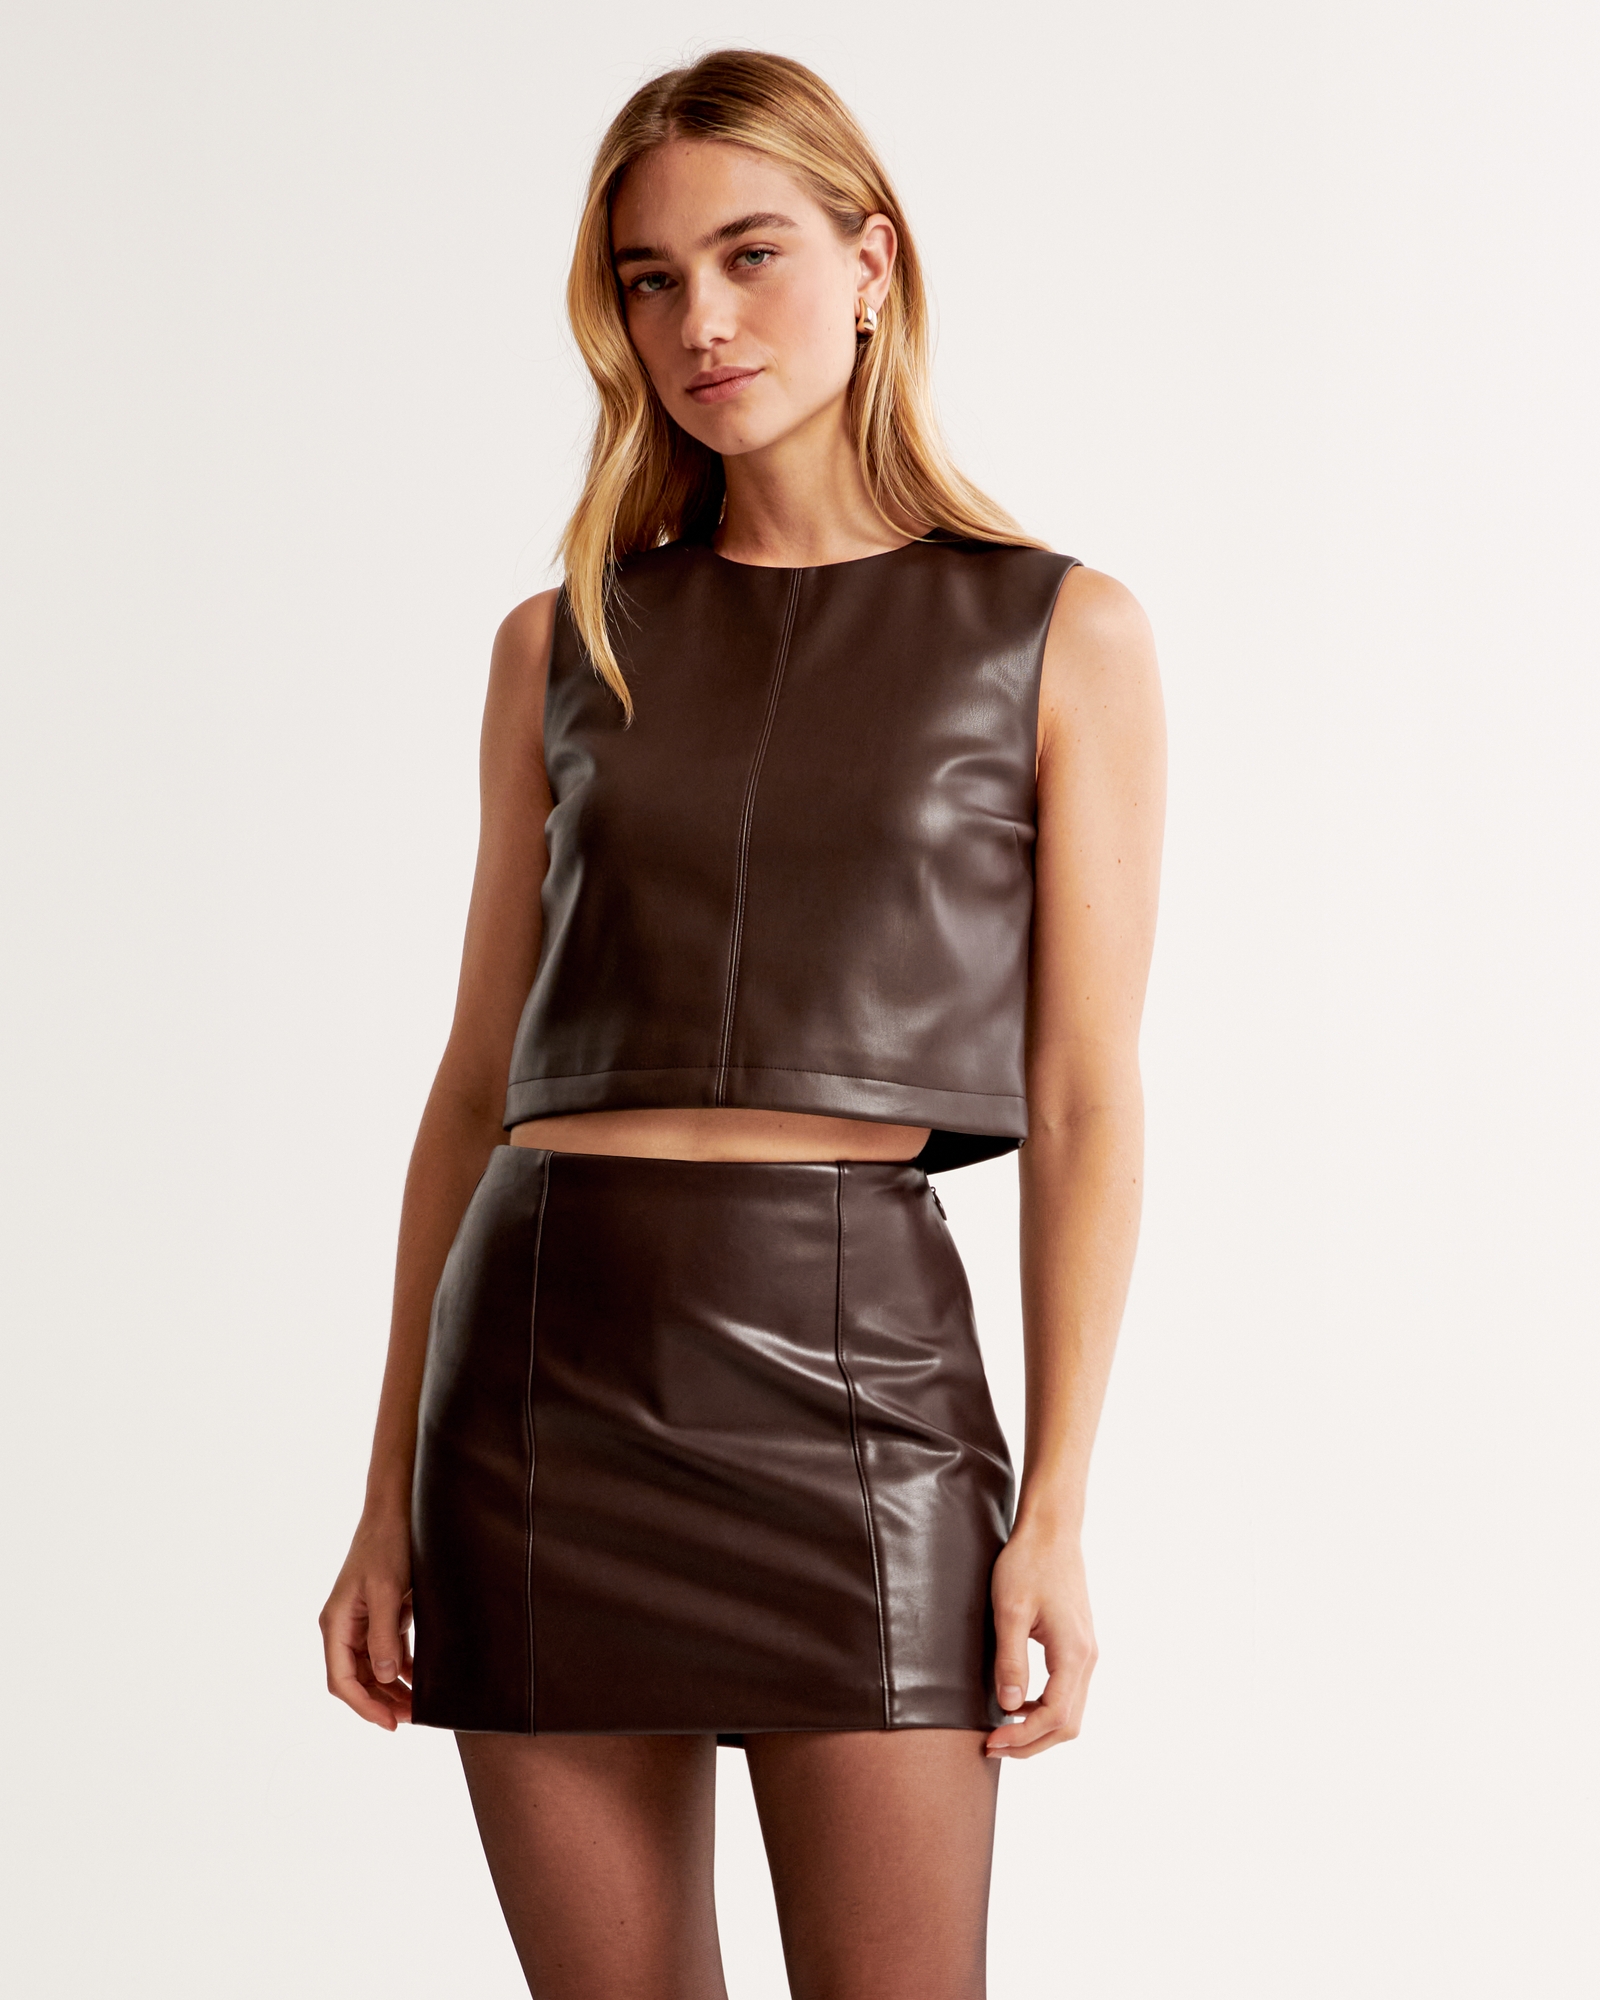 F. LEATHER TANK TOP – AYANEGUI